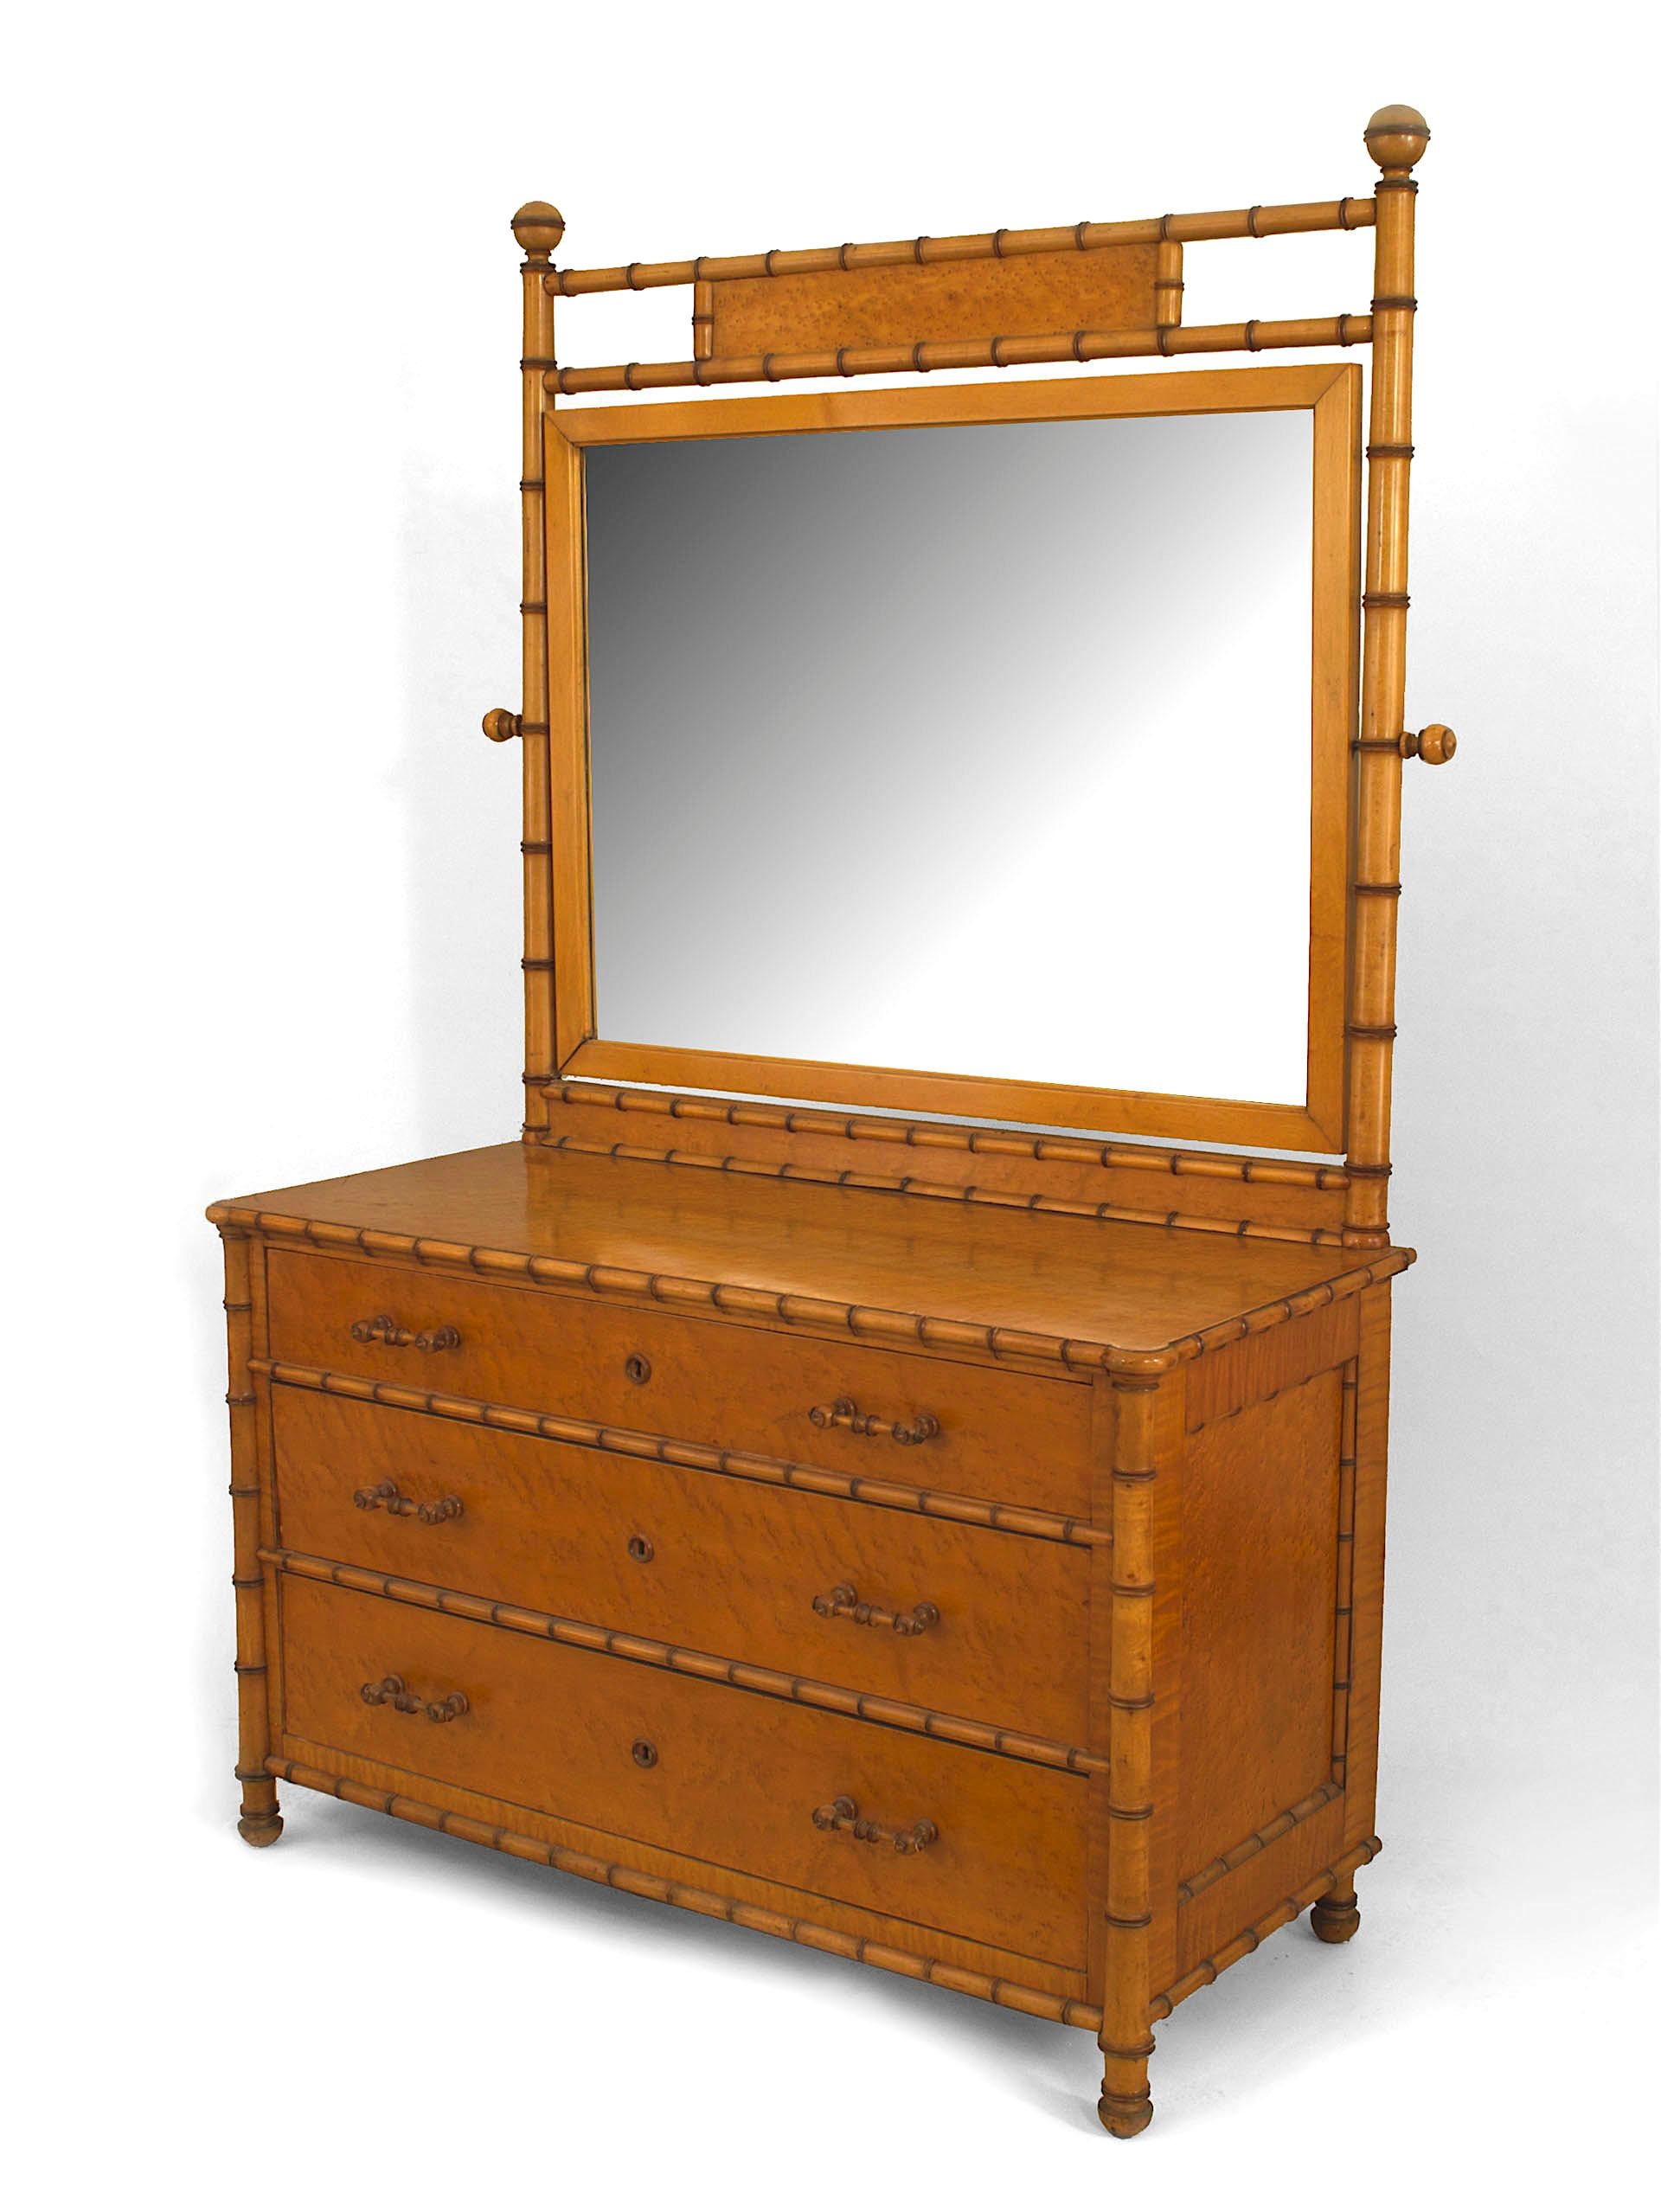 American Victorian faux bamboo birds eye maple 3 drawer dresser with large mirror in frame. (Attributed to R. J. Horner)
